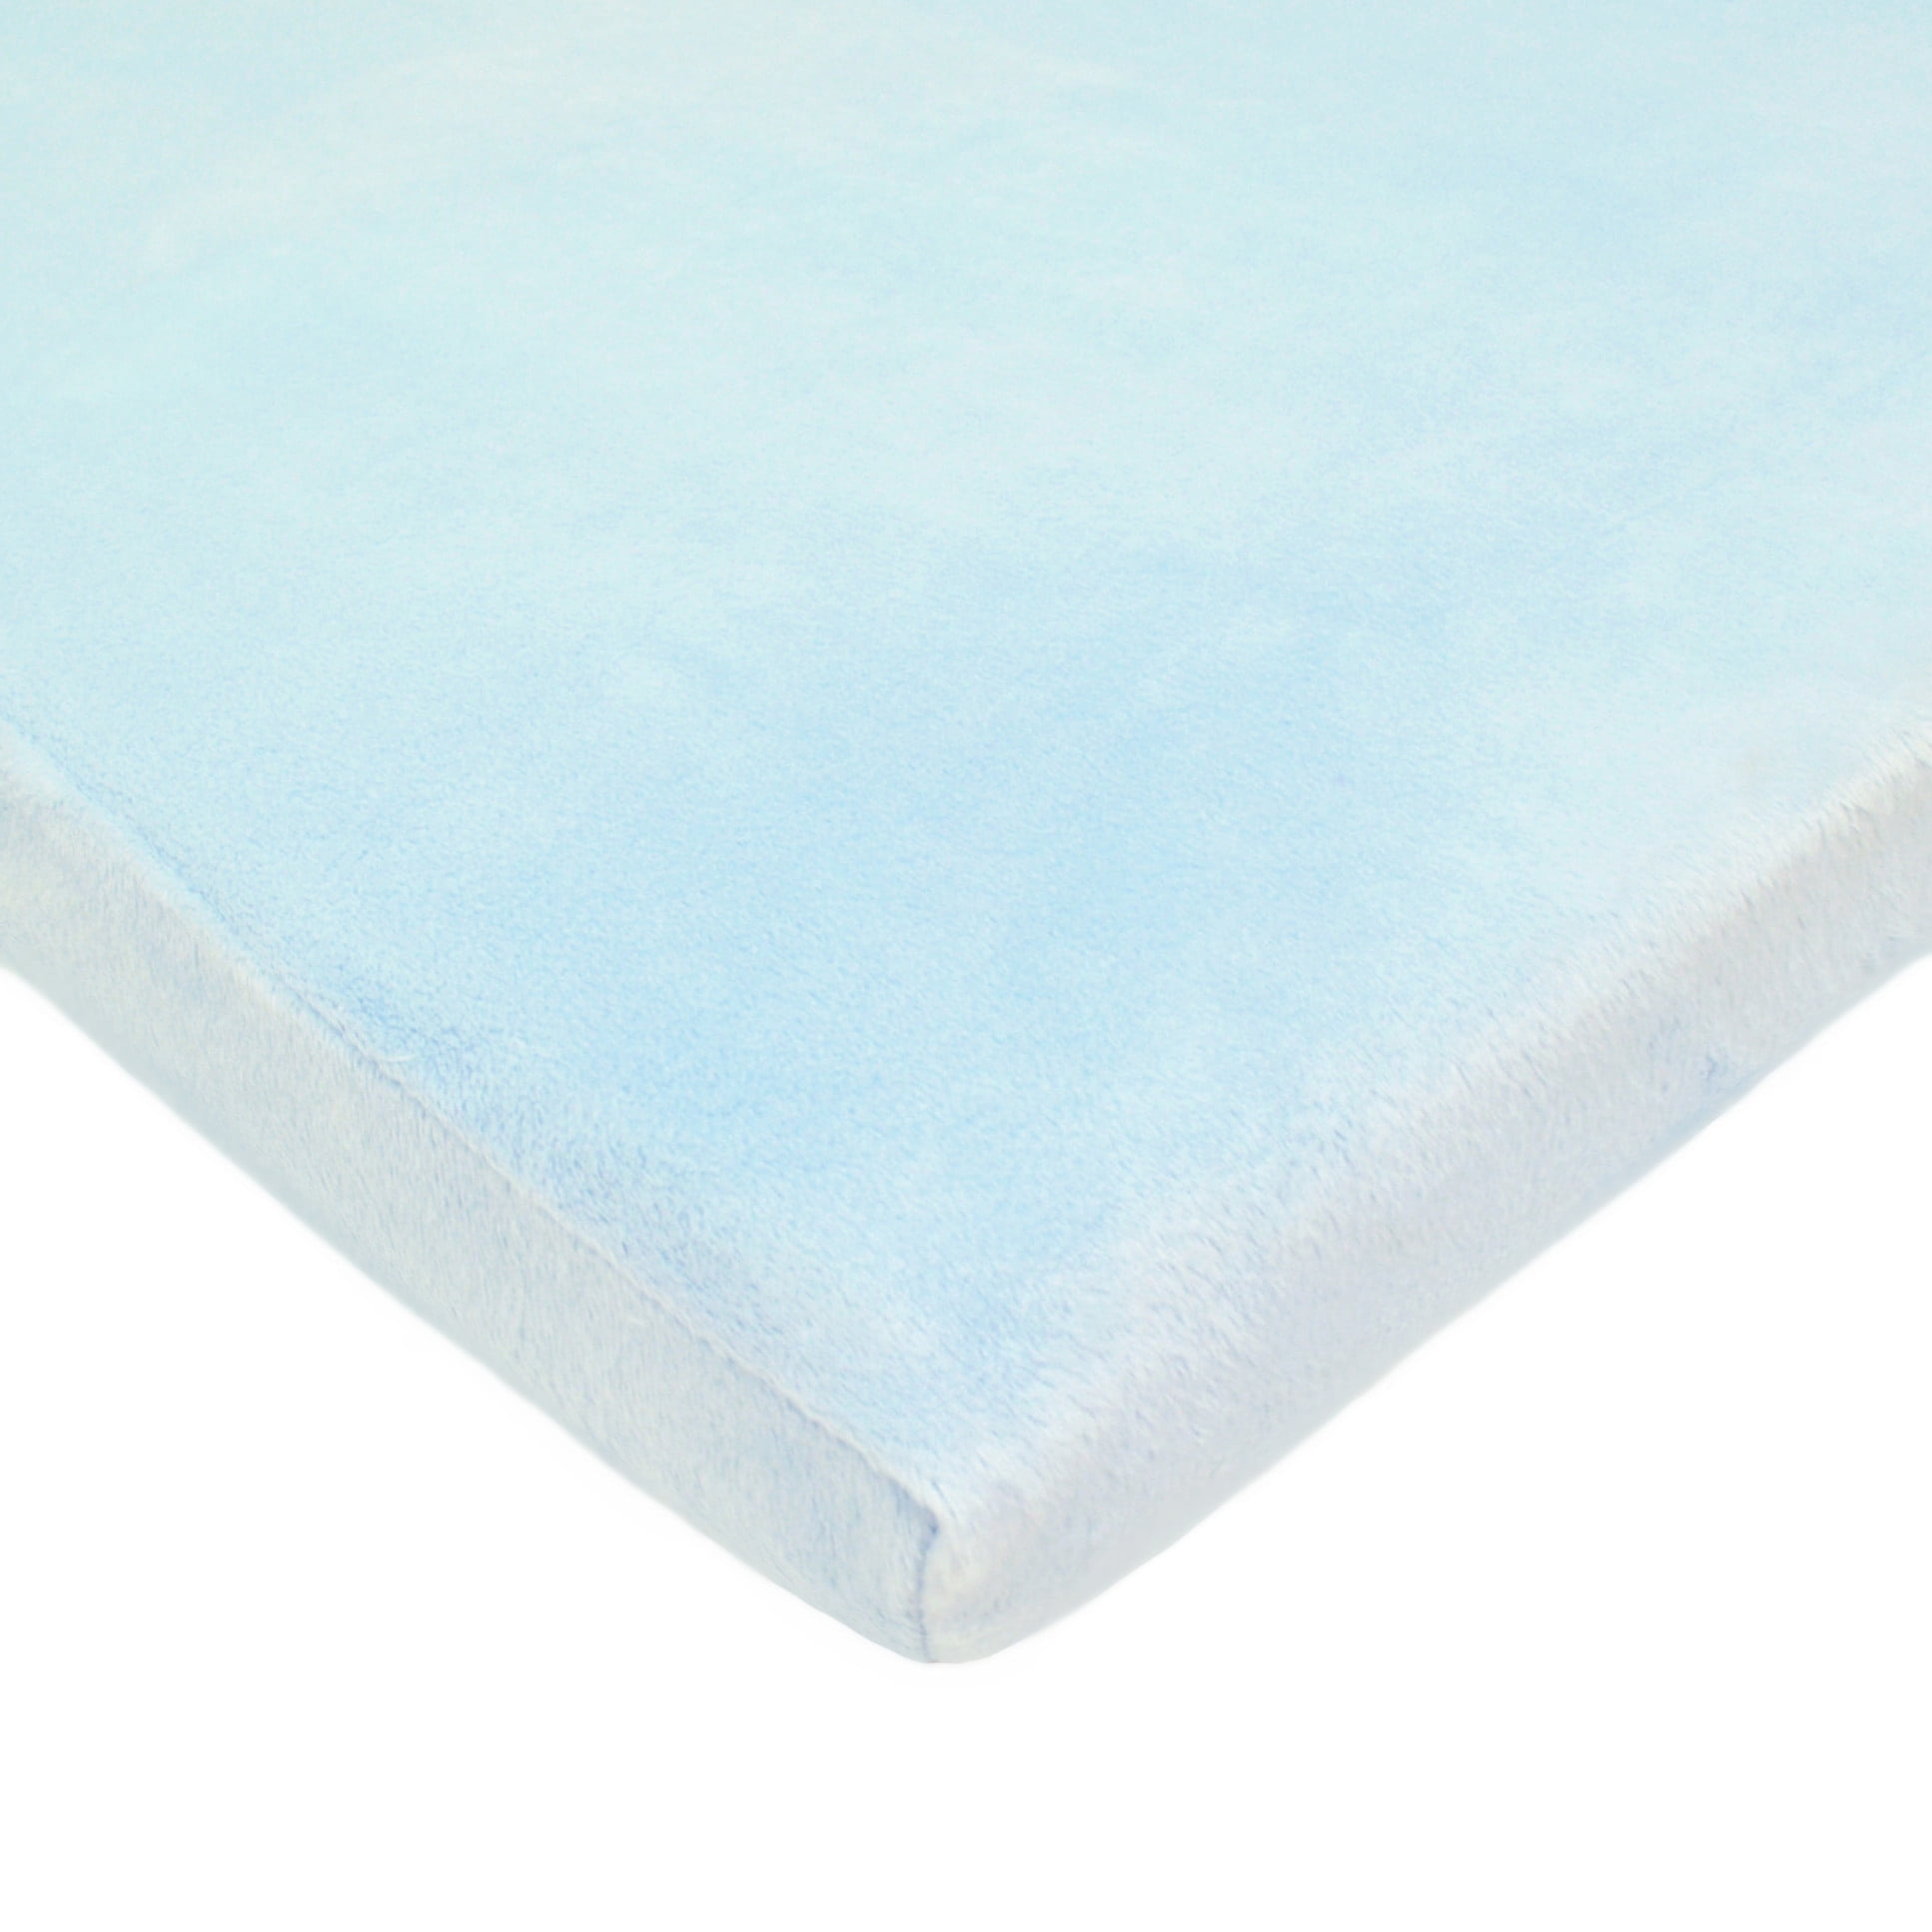 TL Care 100% Natural Cotton Value Jersey Knit Fitted Bassinet Sheet Soft Breathable Blue for Boys and Girls 